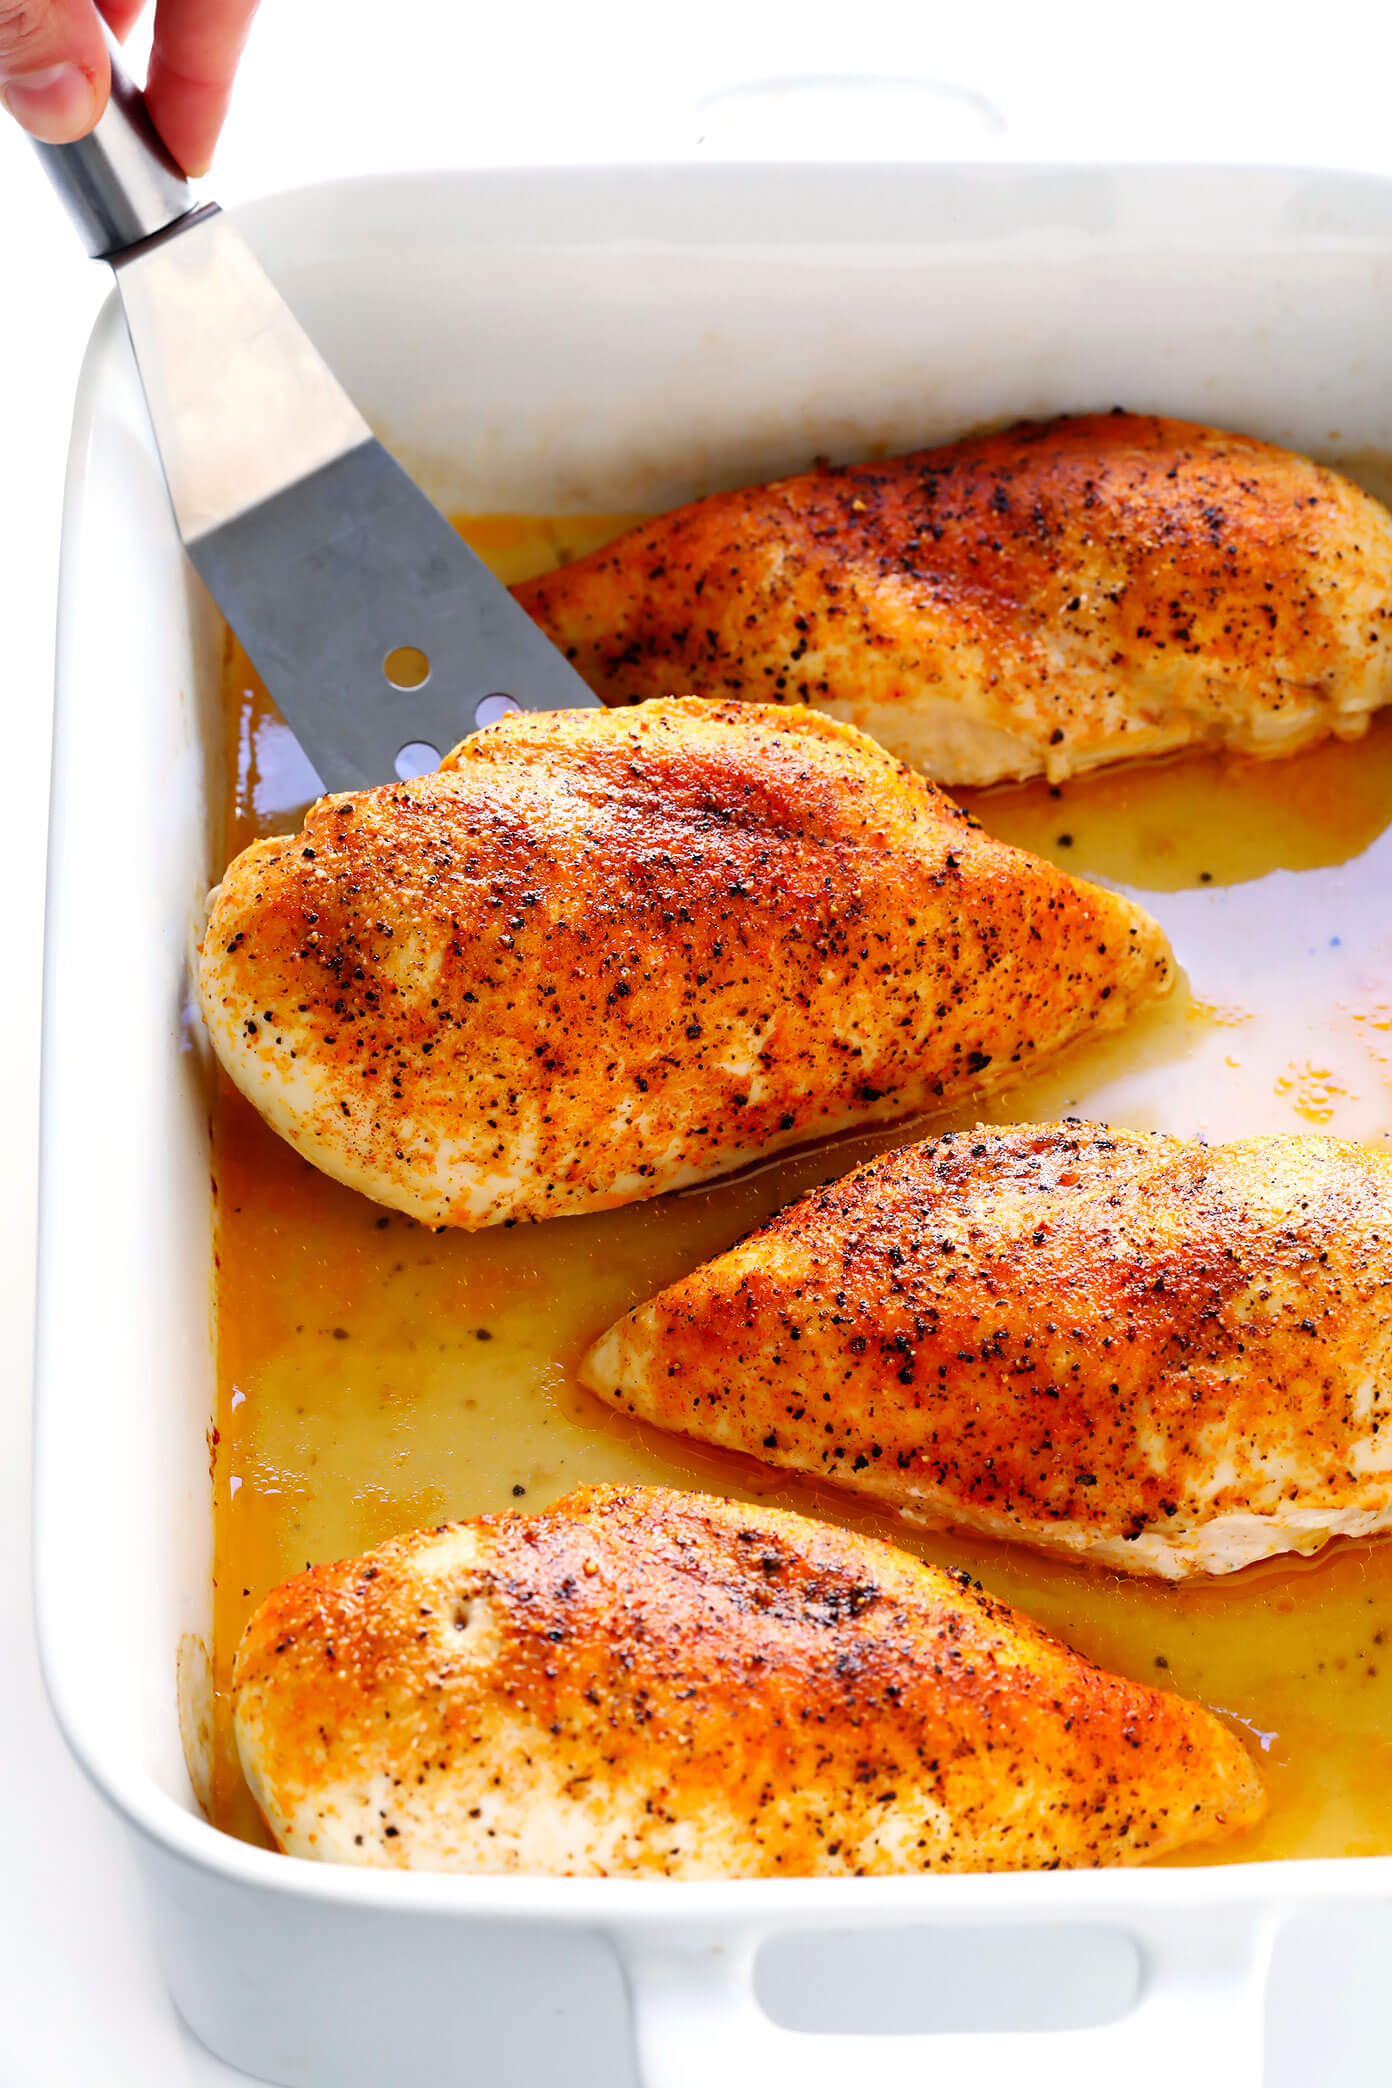 10 Stylish Dinner Ideas With Boneless Chicken Breast baked chicken breast gimme some oven 2022